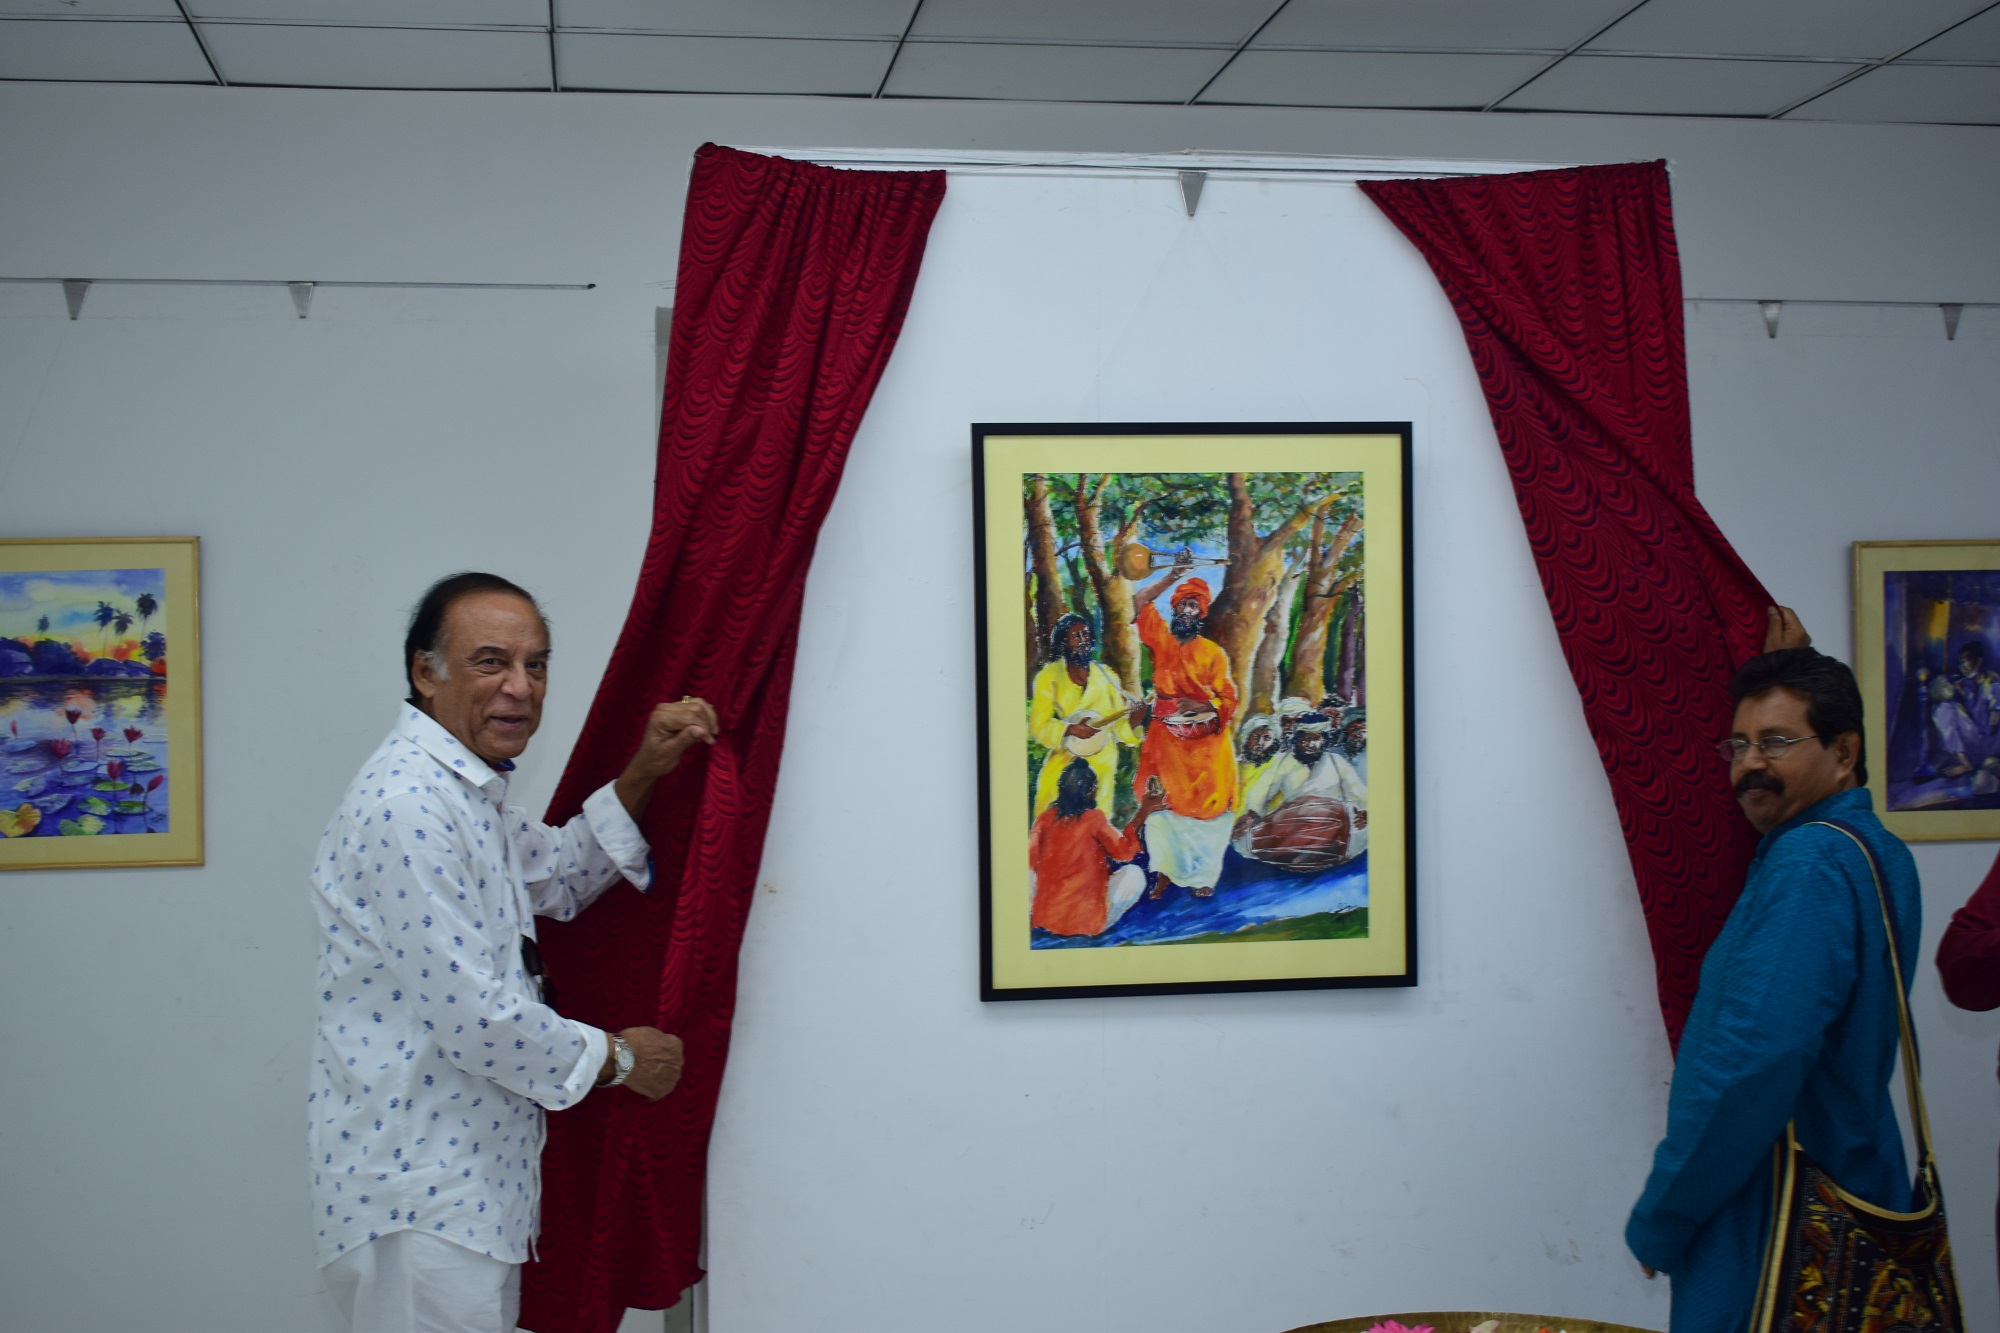 ‘Maatir Taane’- An Art Exhibition by Painter Sandeep Manna showcased the Pure and Authentic Stories of Rural Bengal